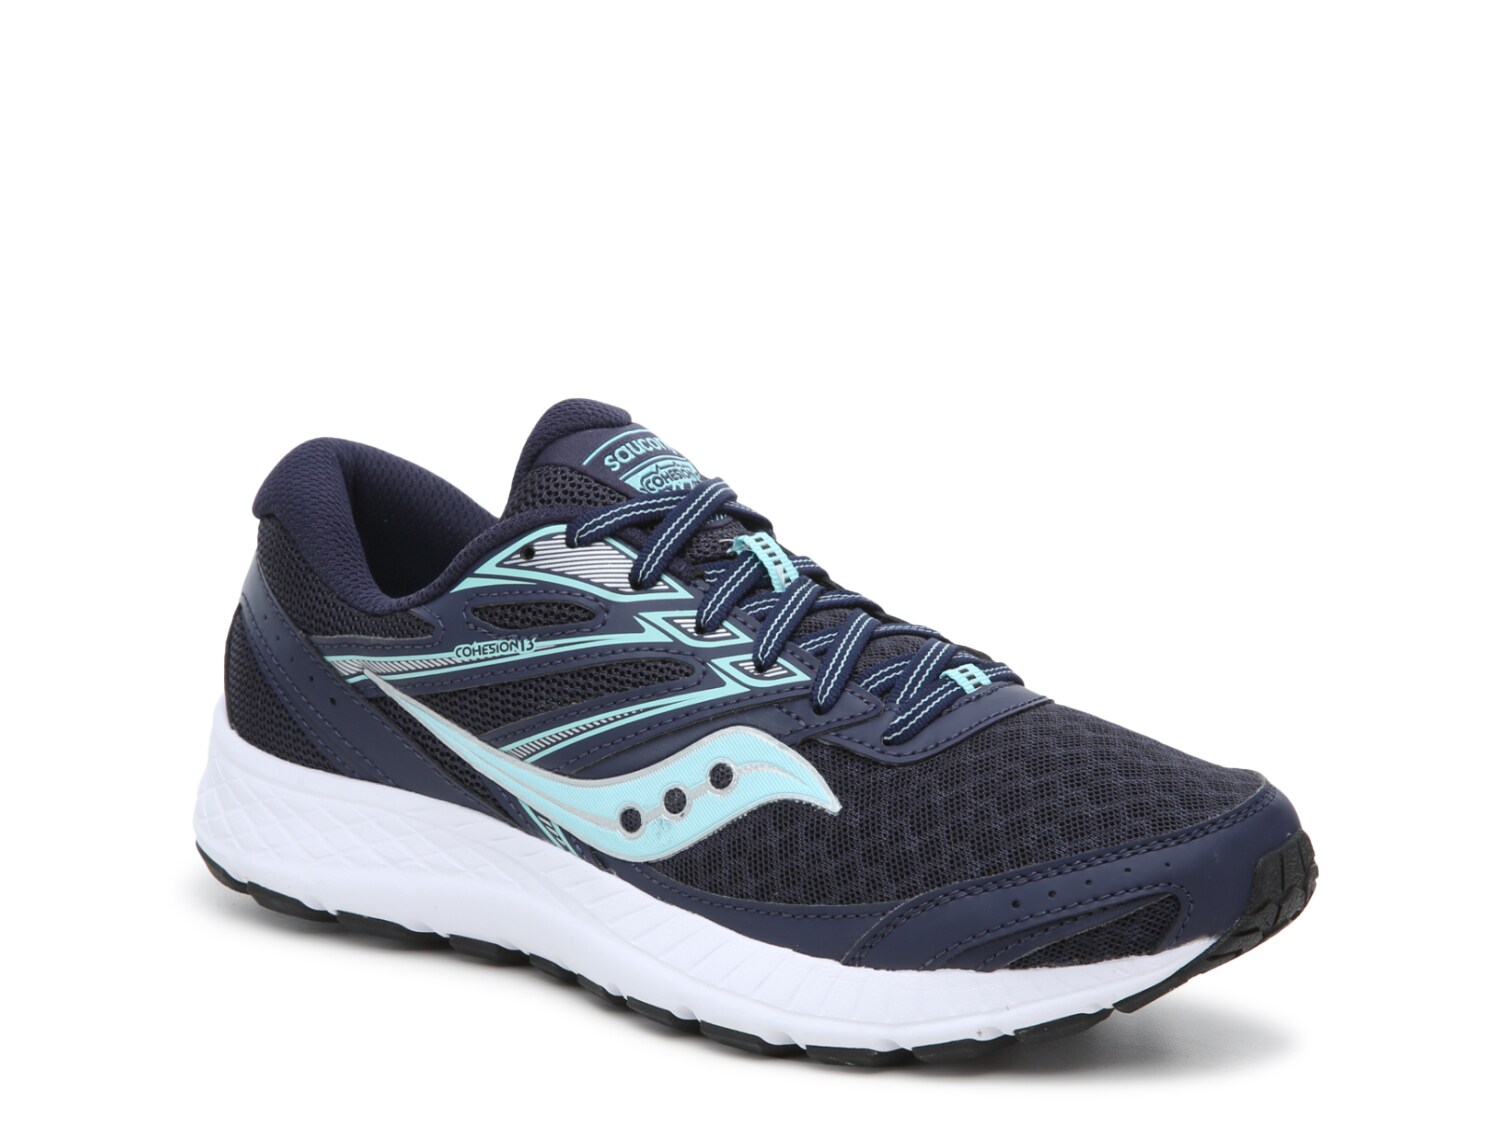 womens saucony running shoes clearance